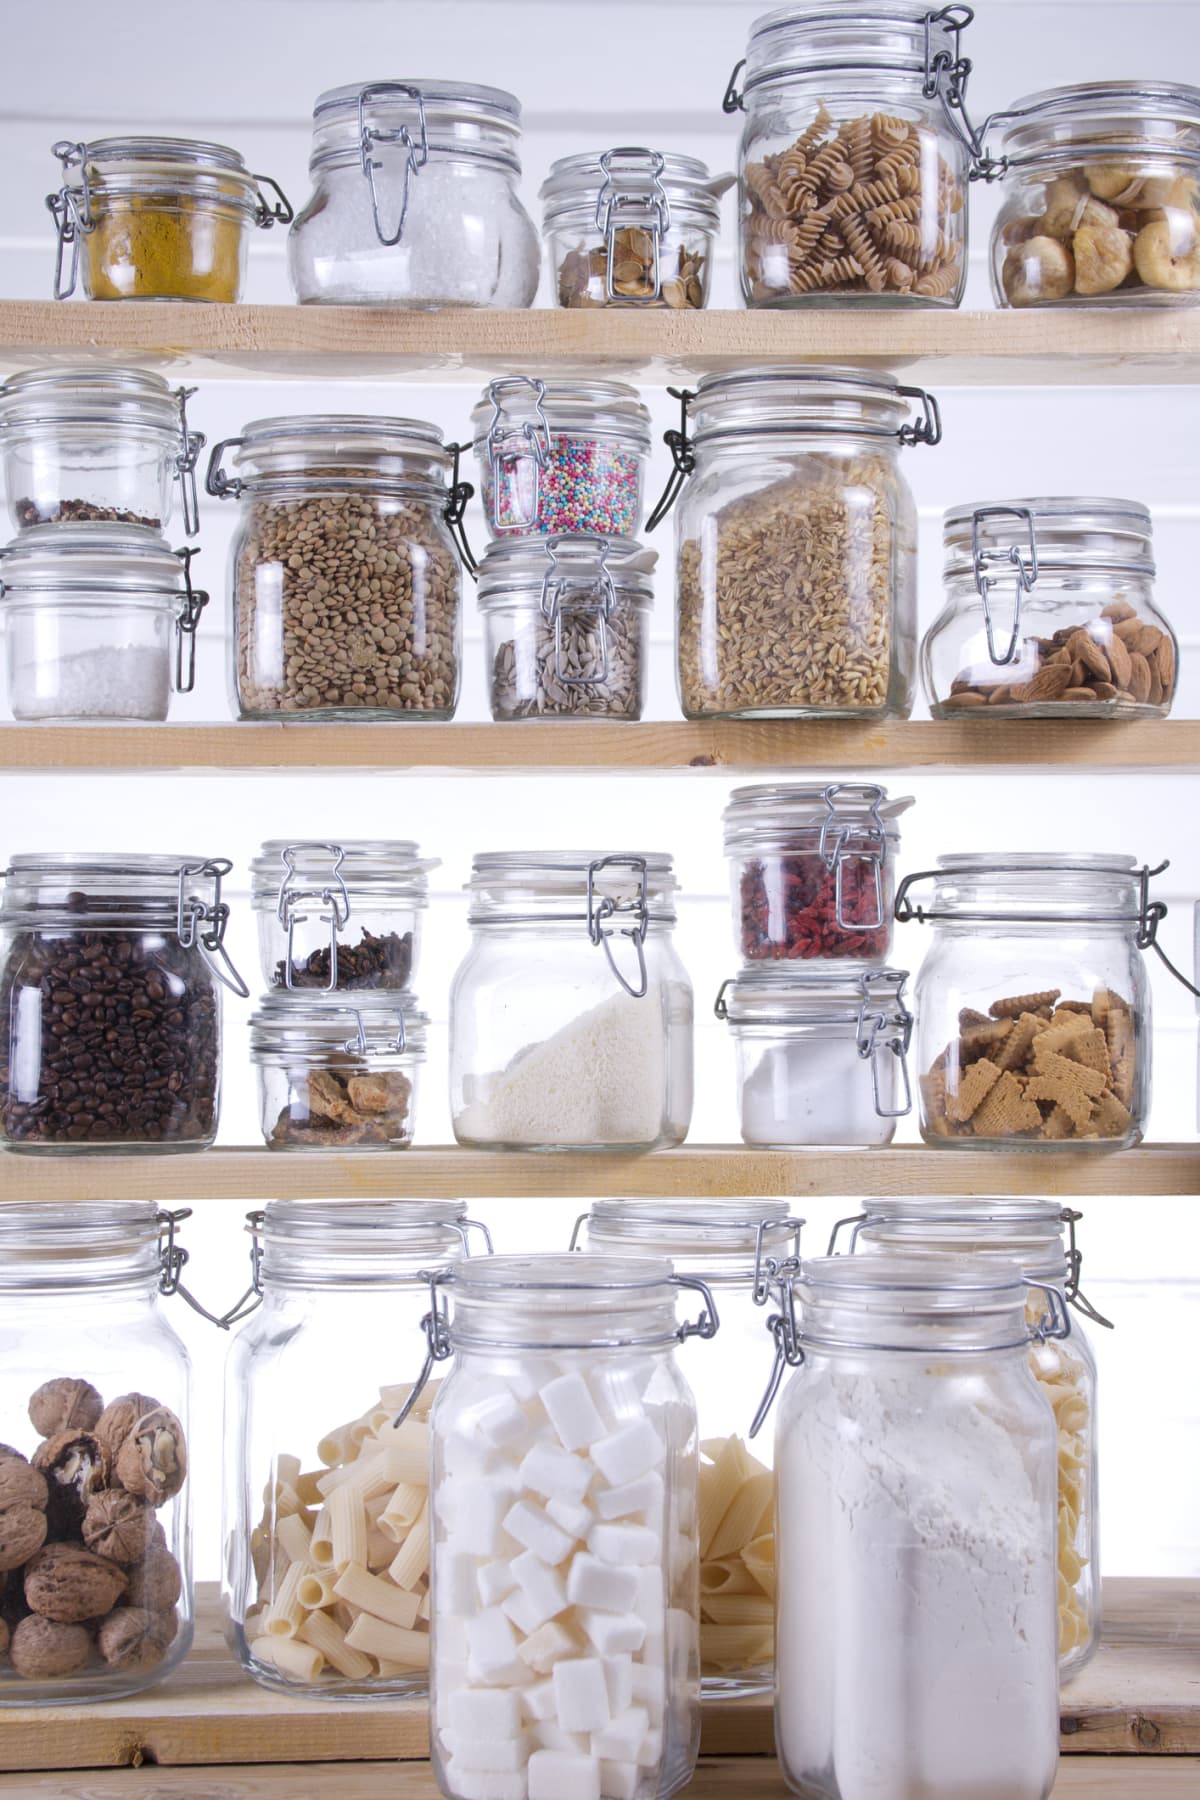 Eclectic array of glass jars display foods in a kitchen pantry